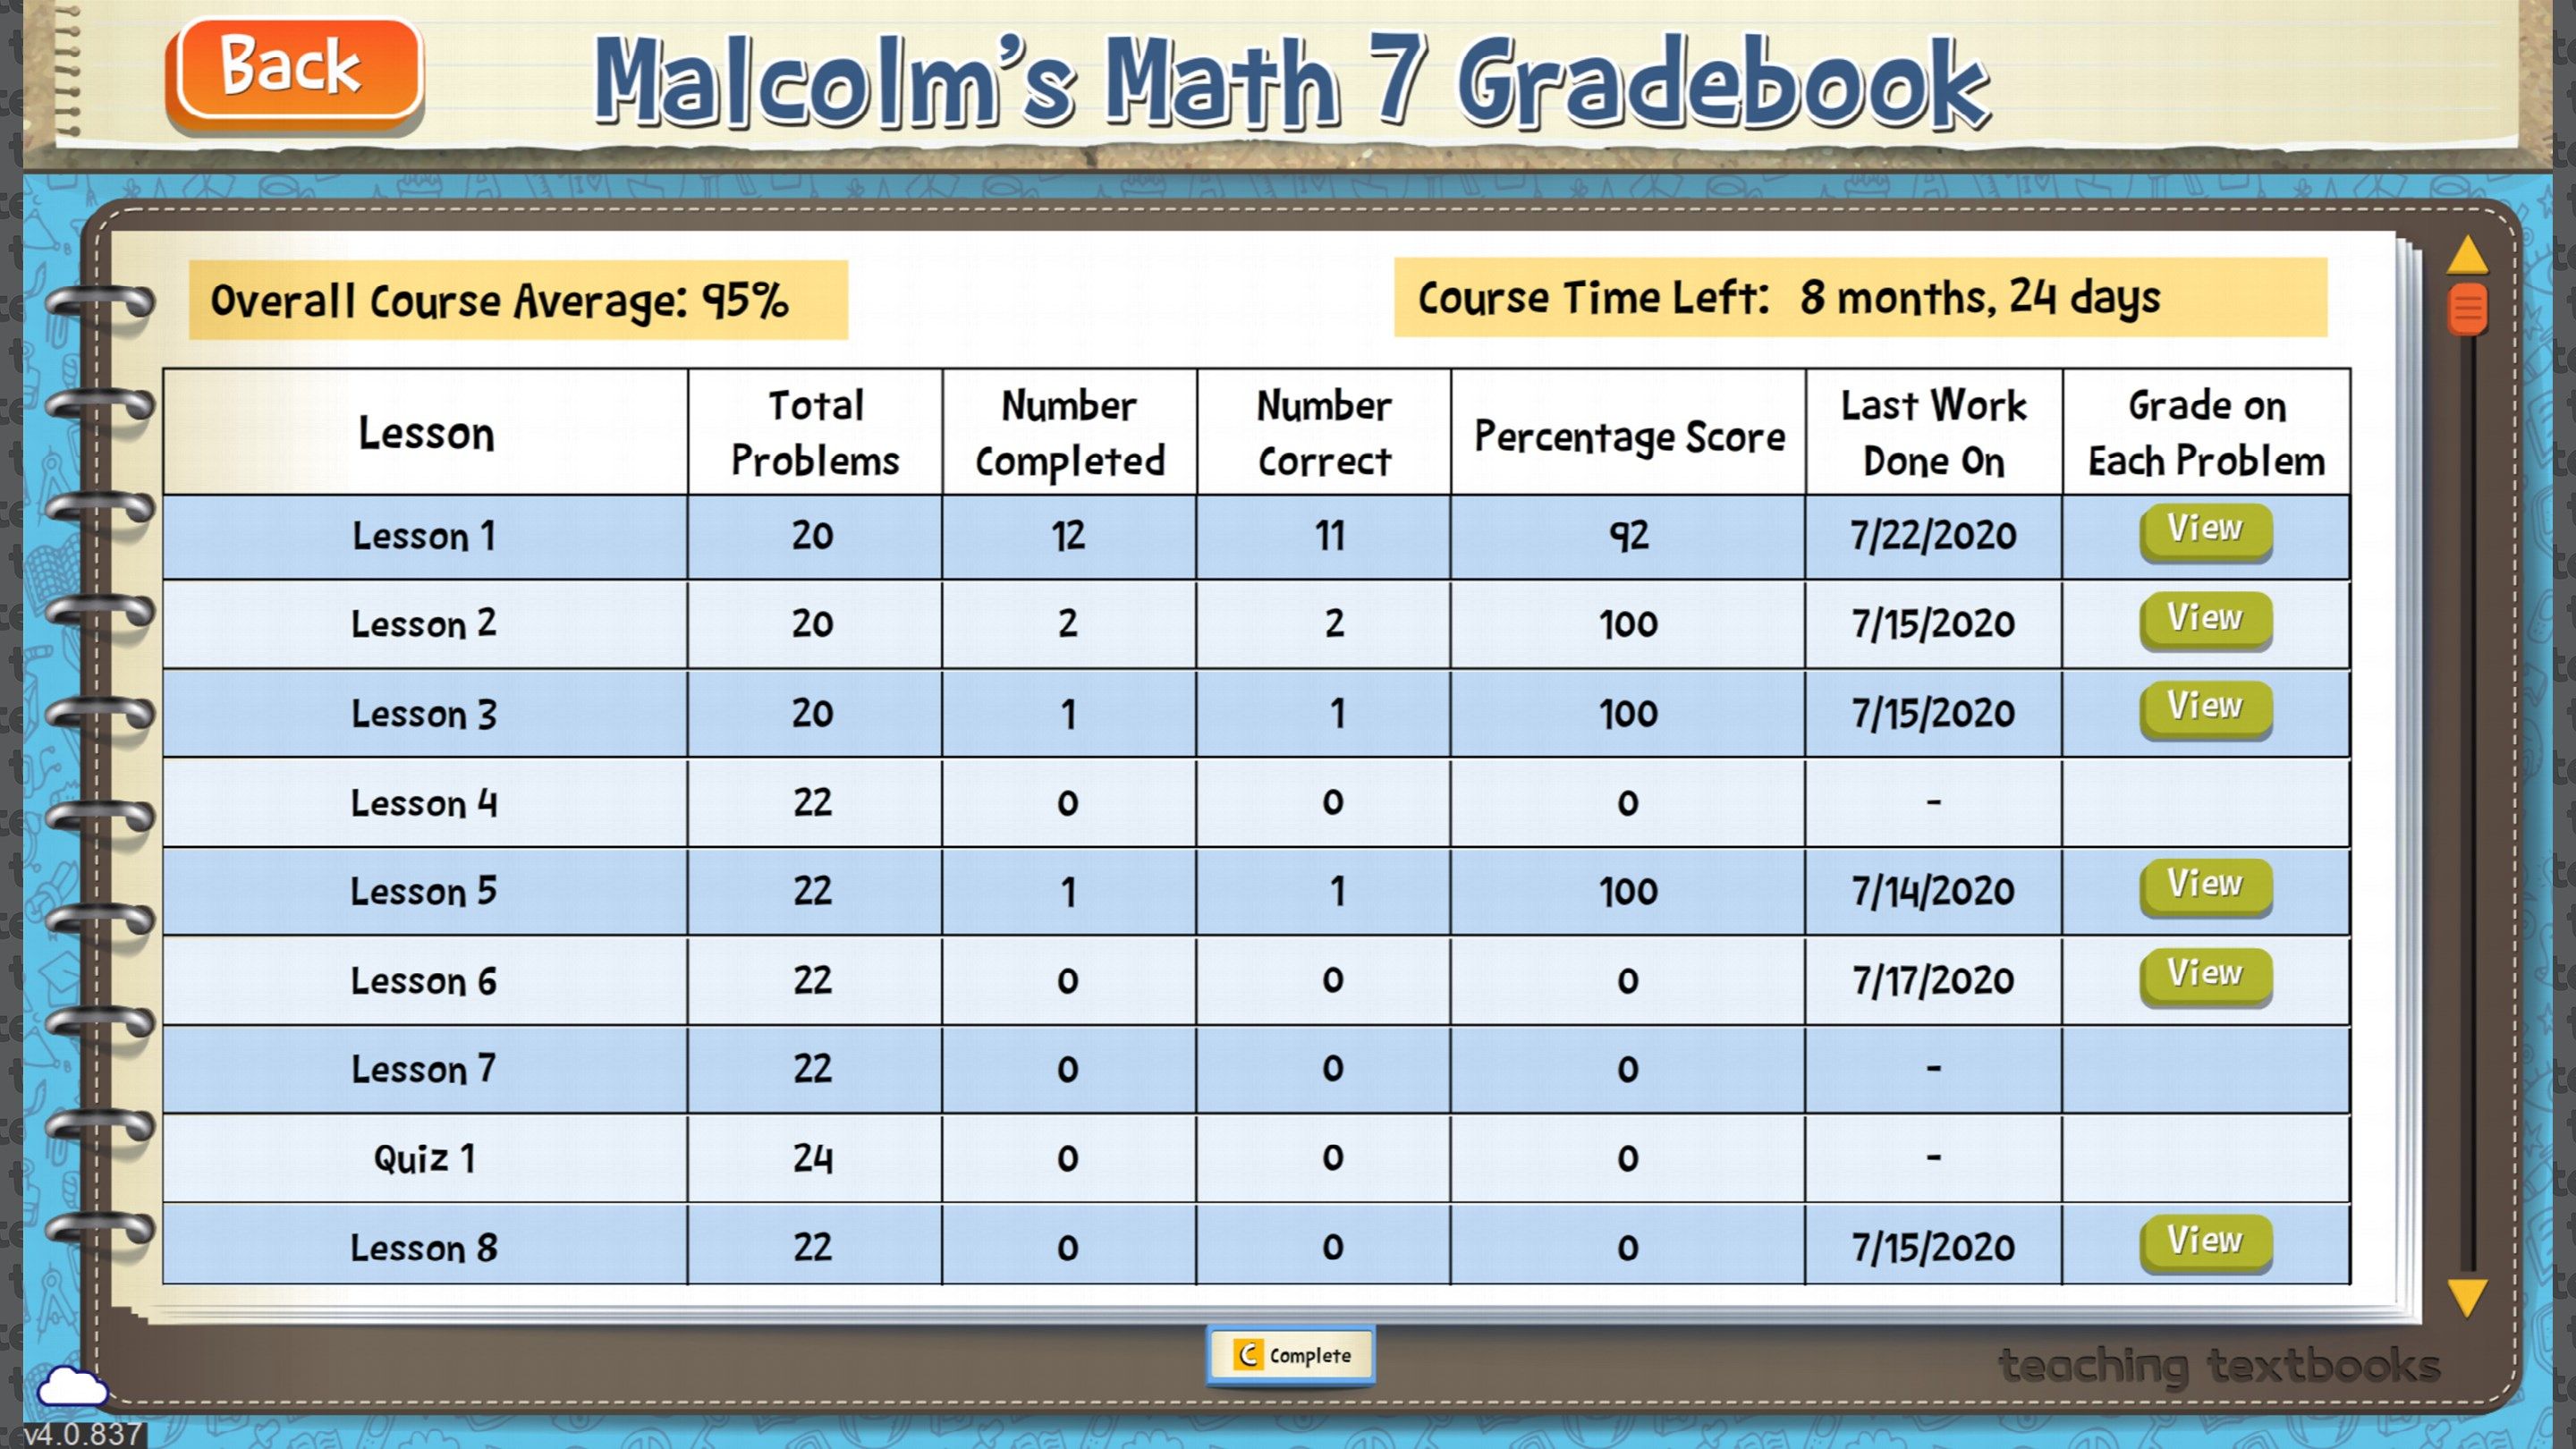 The Gradebook shows the details of the student's progress through the course. As the parent, you can edit the Gradebook, or print it for your records.